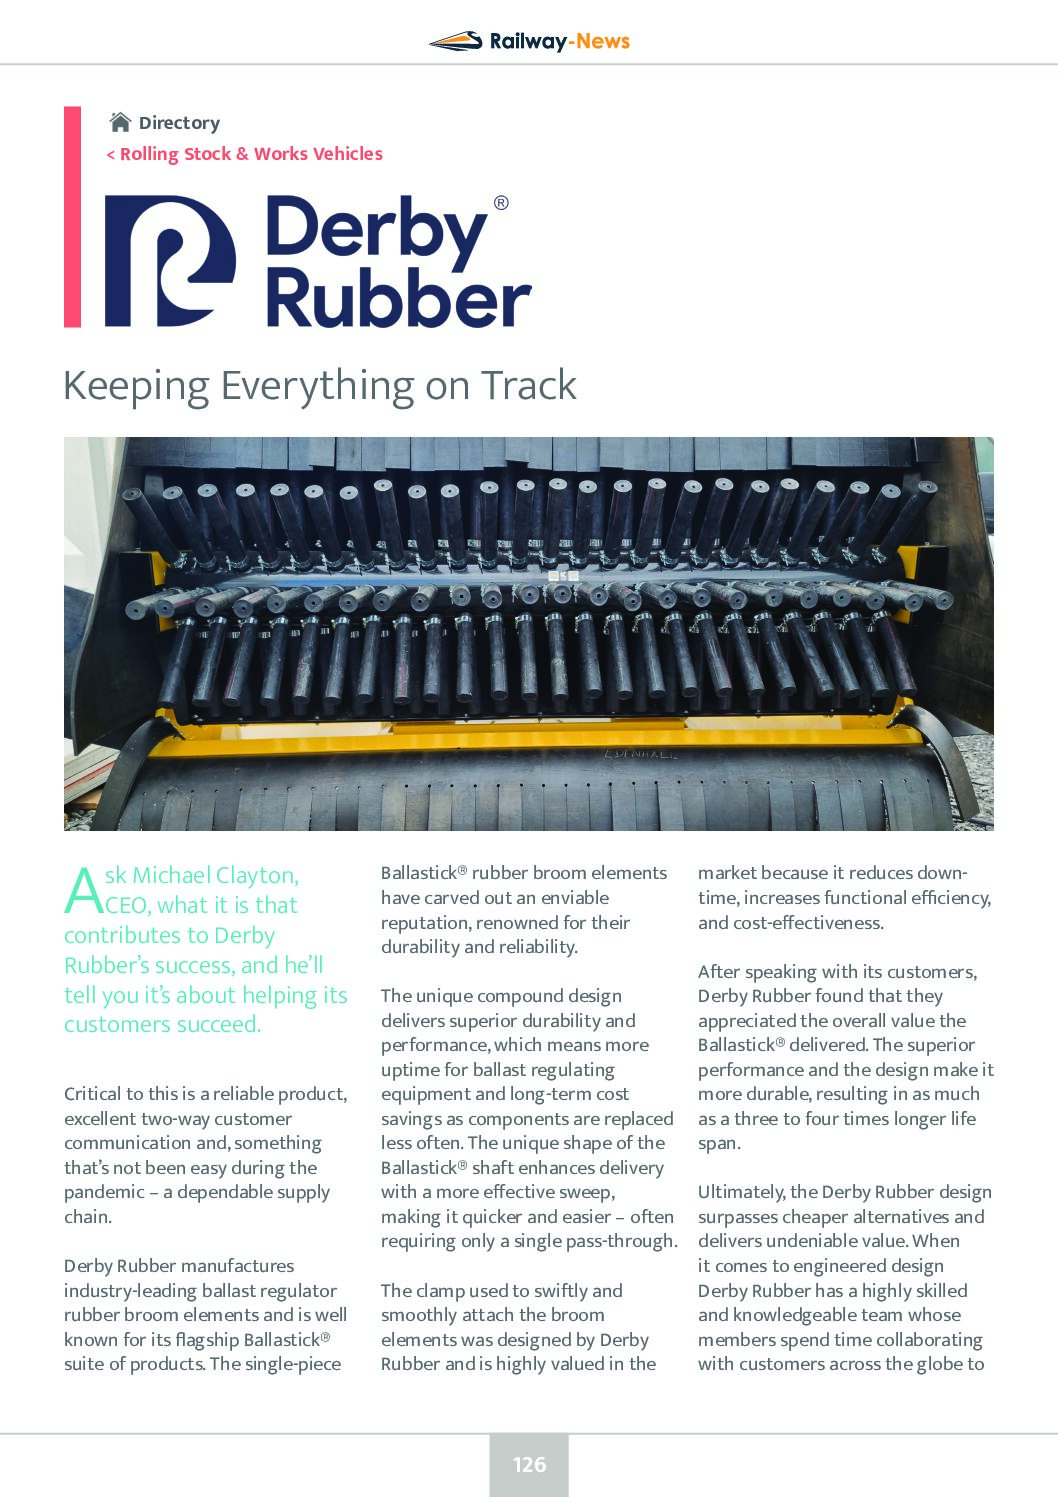 Derby Rubber – Keeping Everything on Track